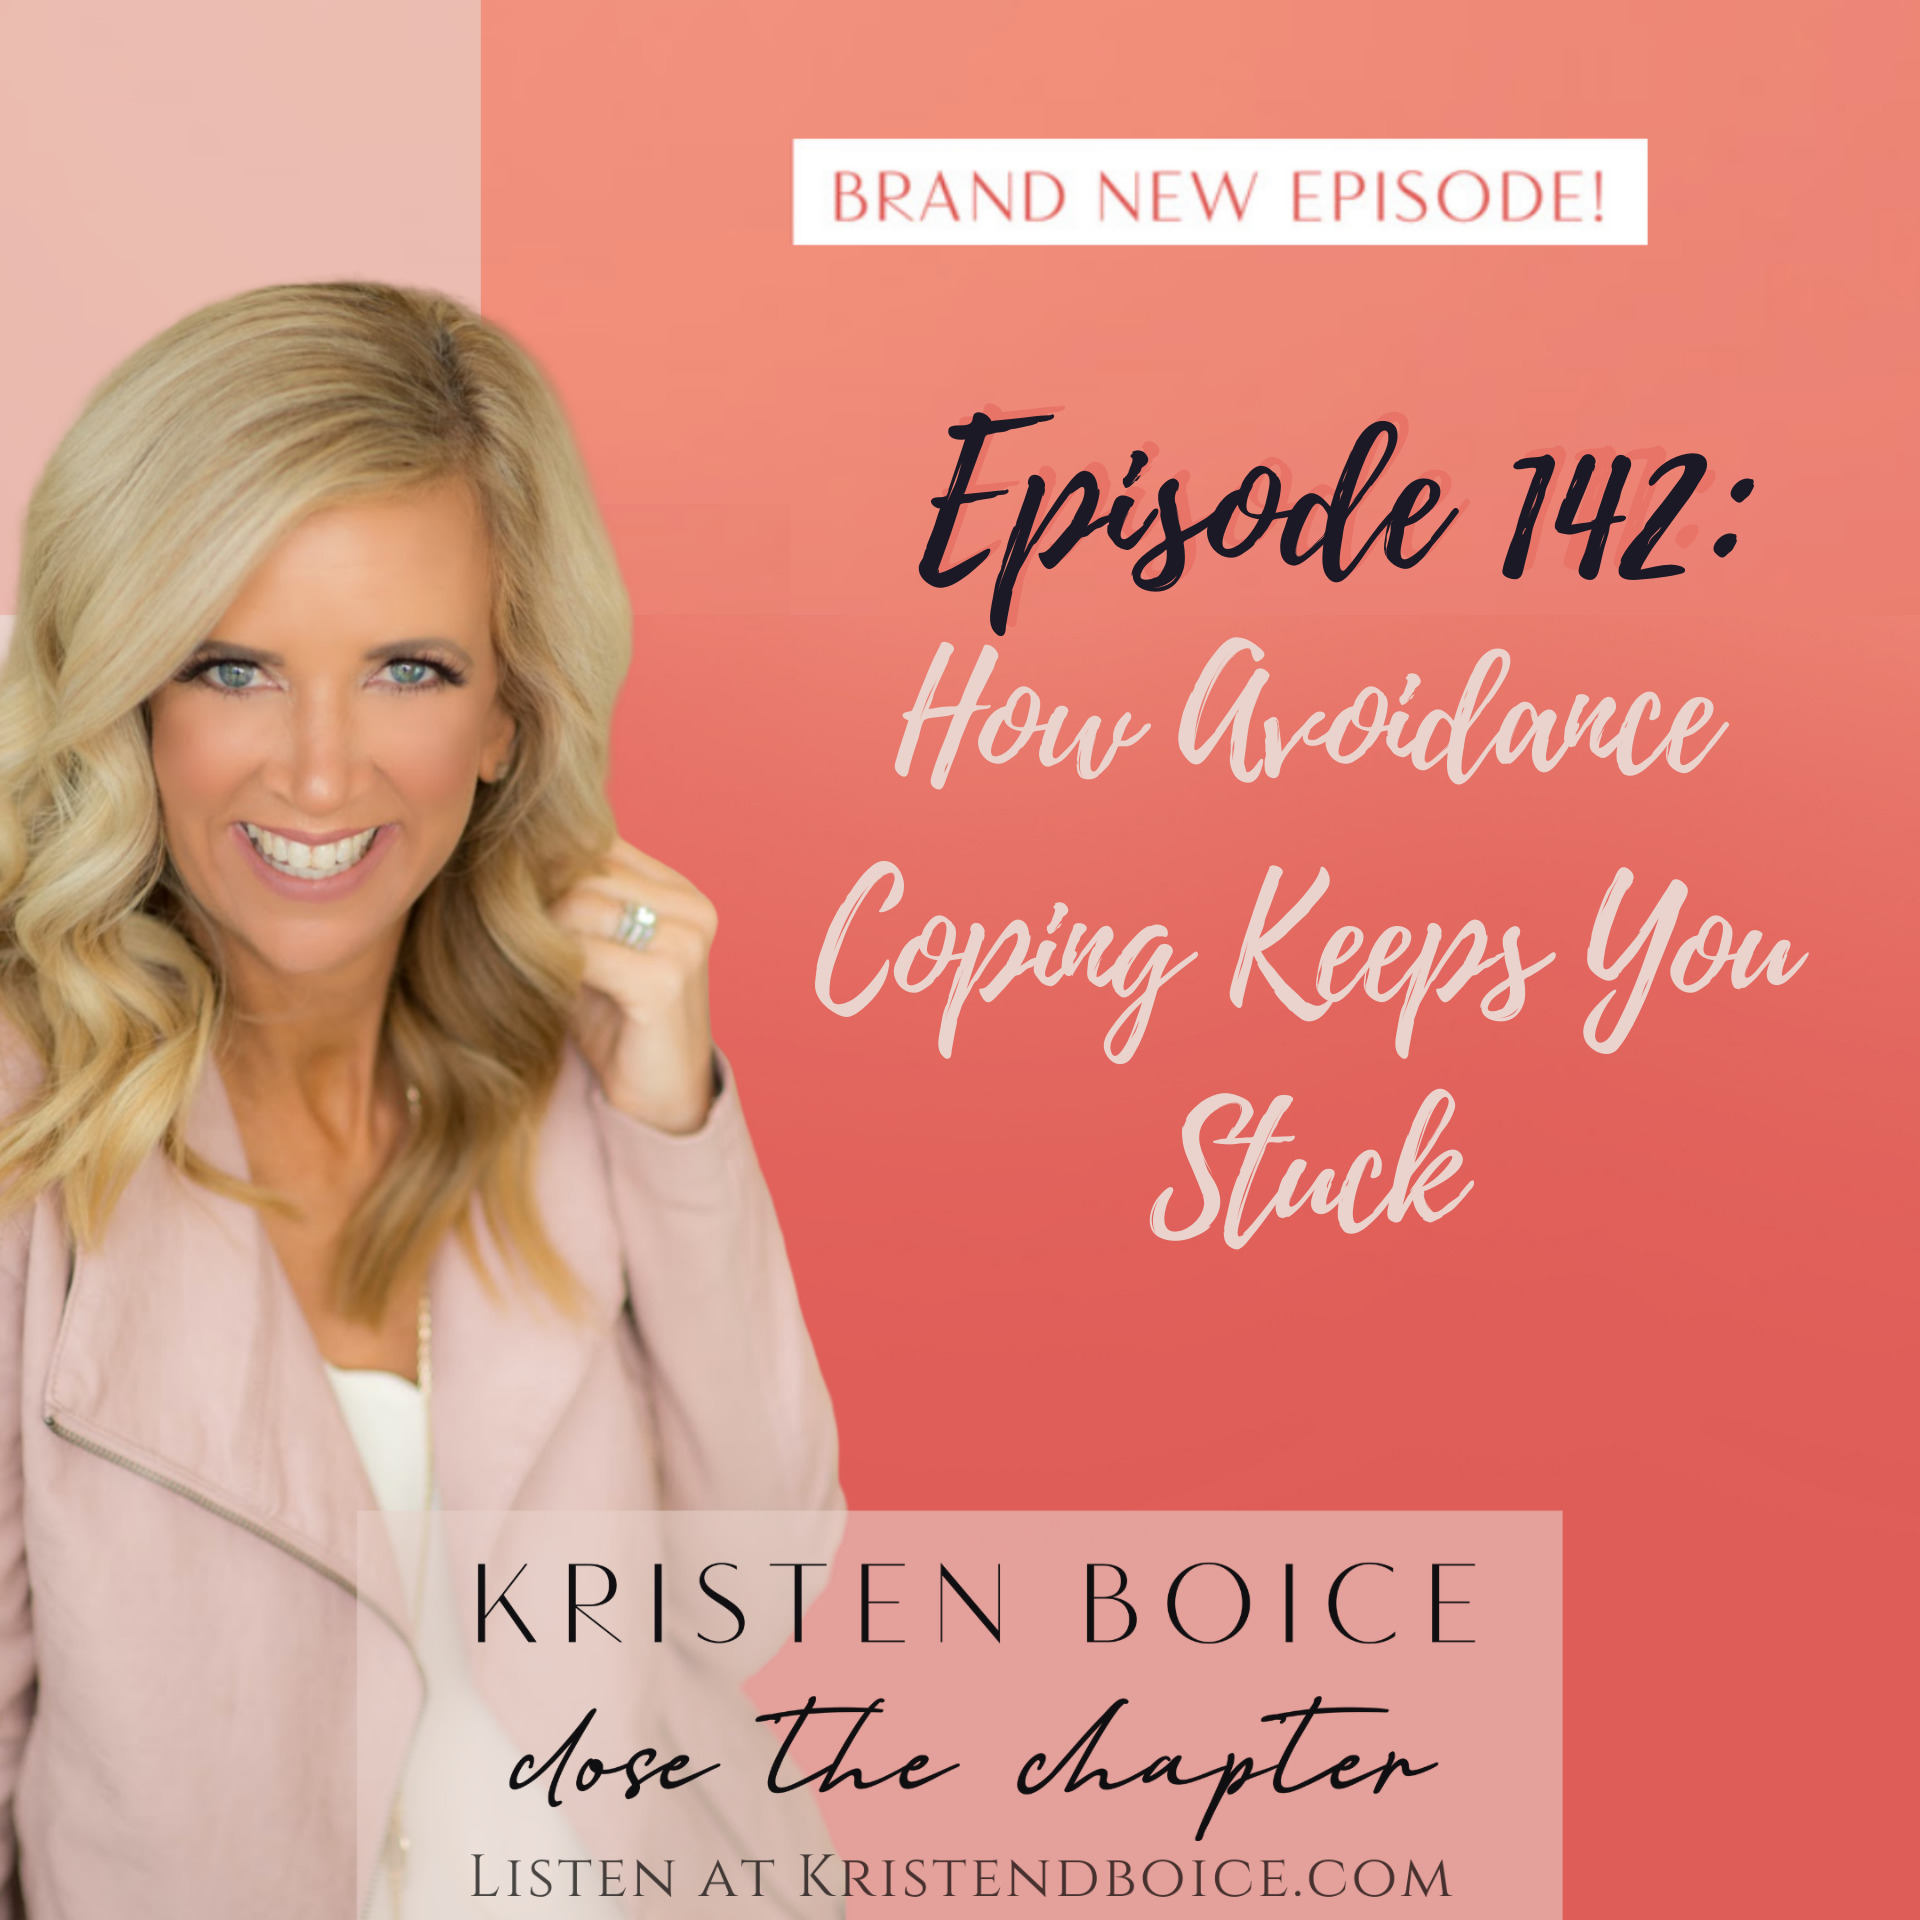 Episode 142 How Avoidance Coping Keeps You Stuck